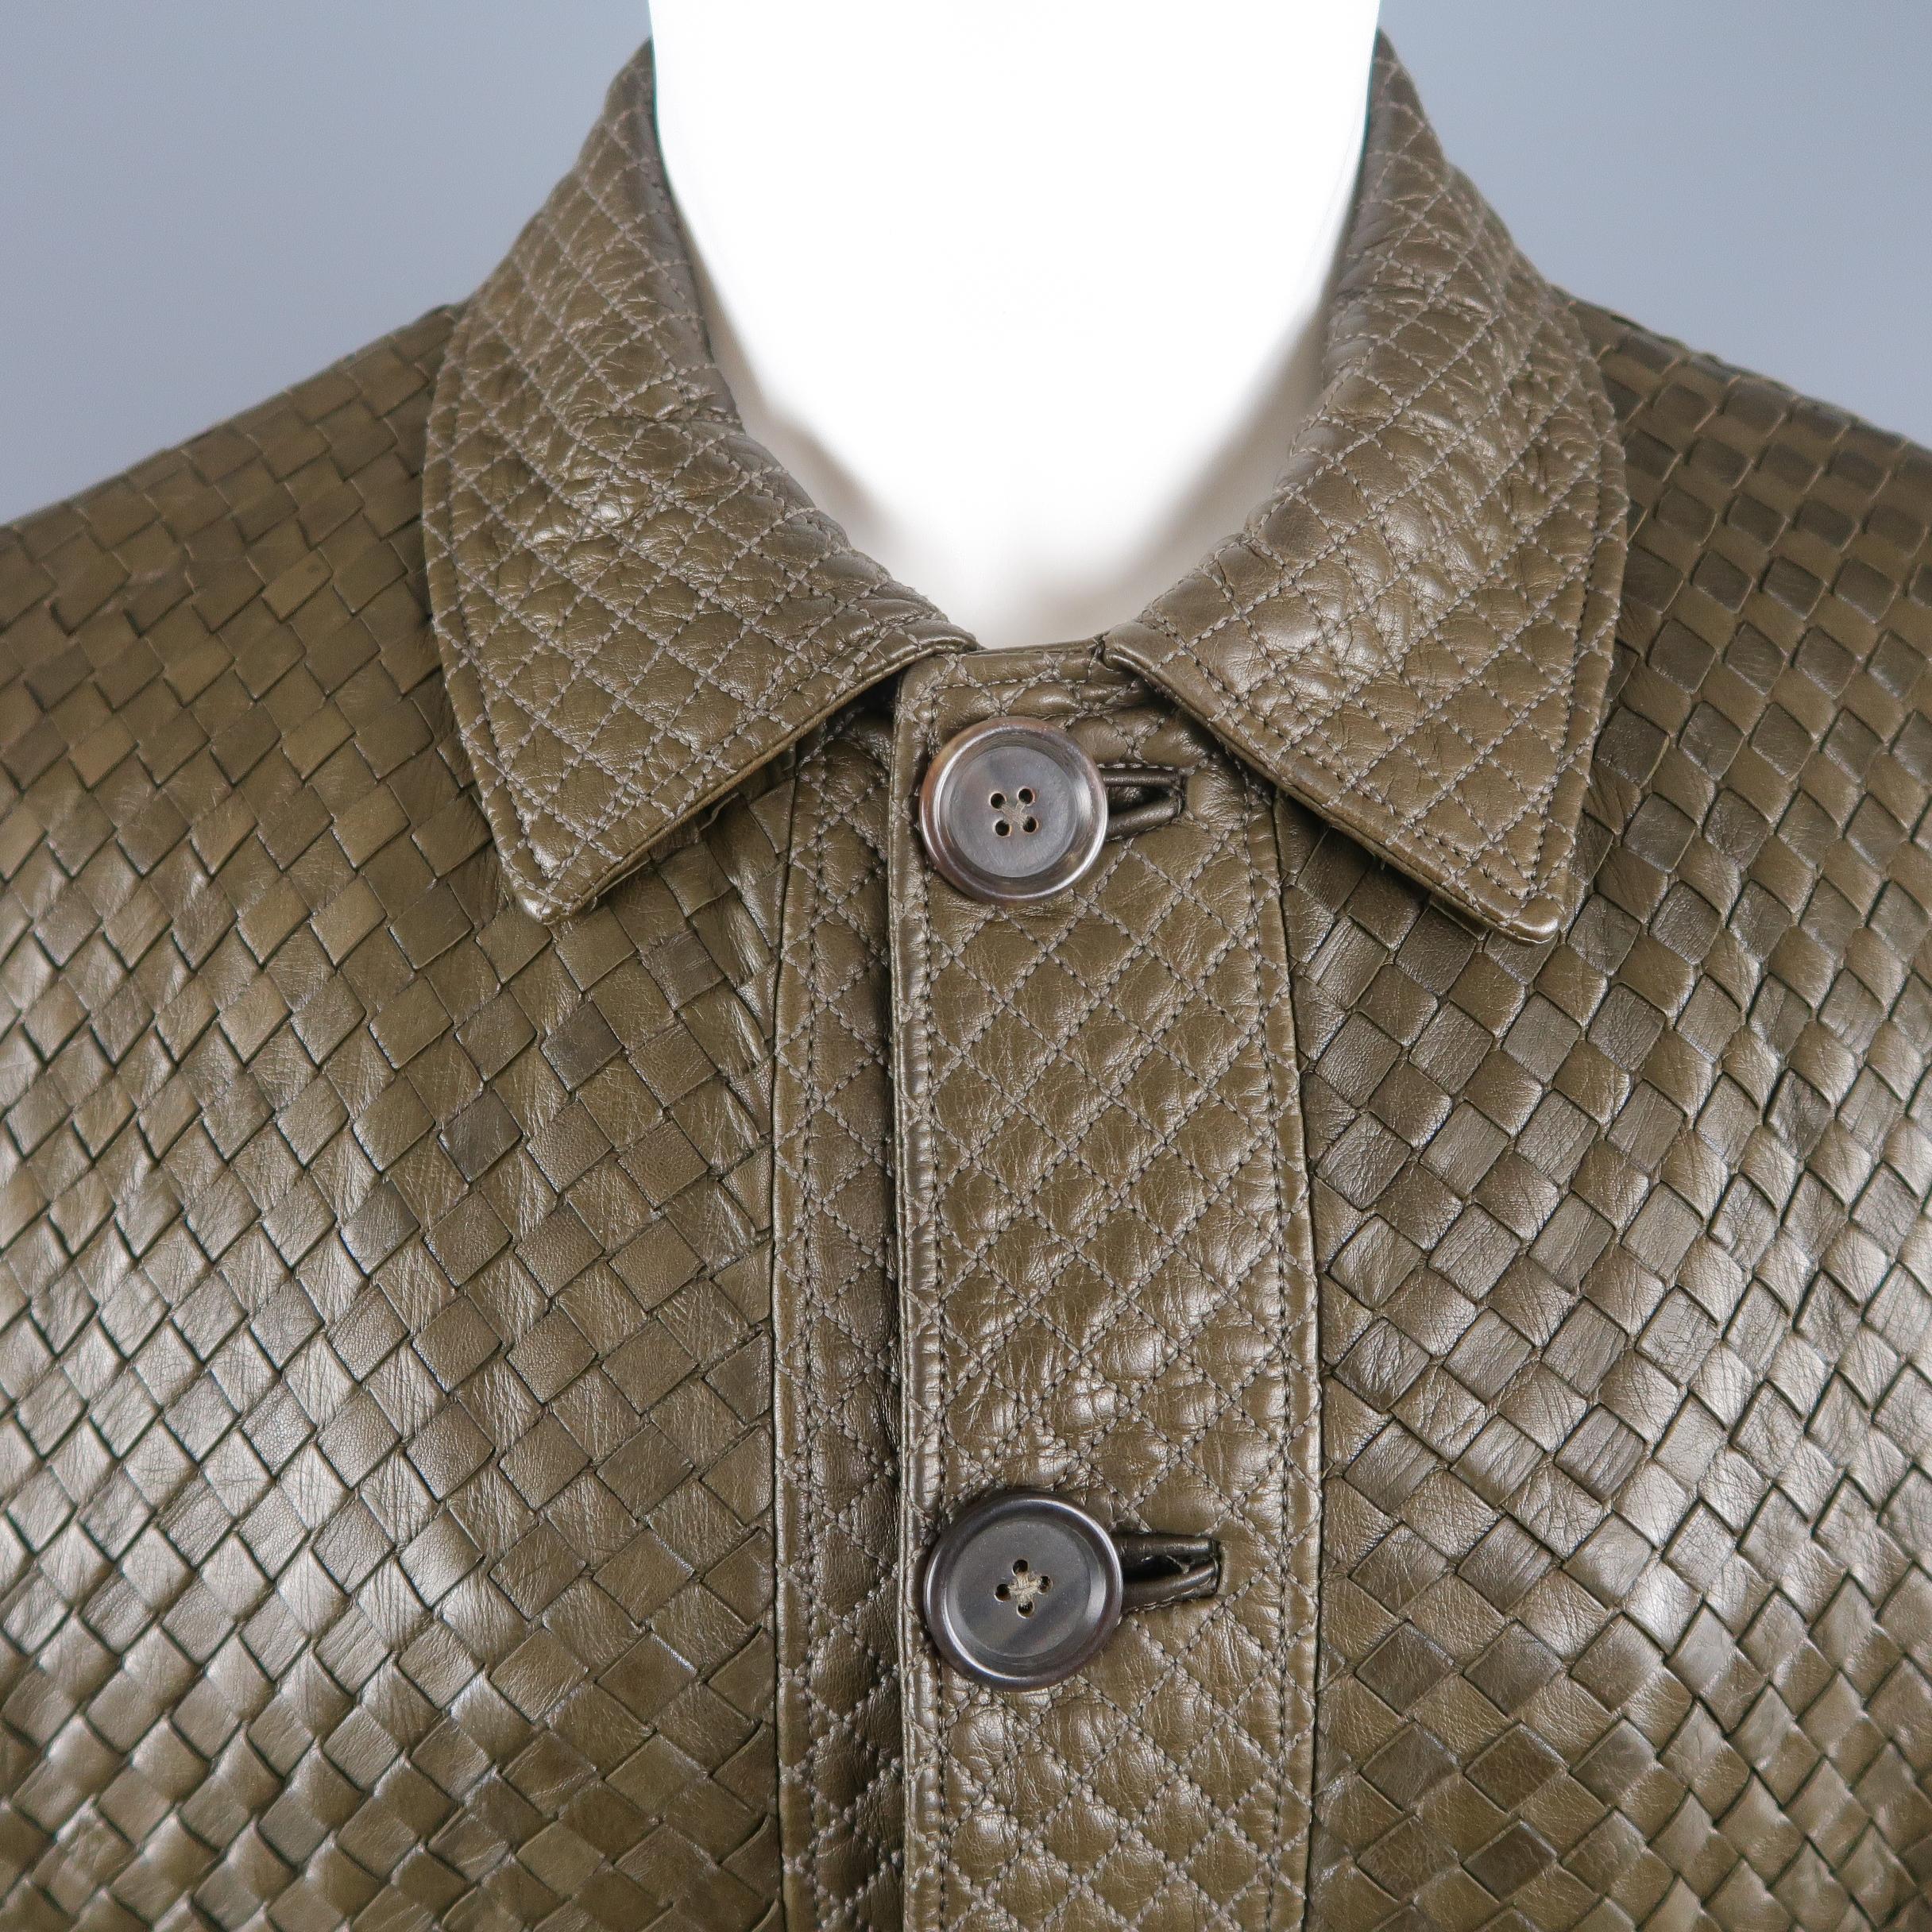 Bottega Veneta bomber jacket comes in soft olive green signature Intrecciato woven leather and features a quilted collar, button up front, slanted zip pockets, and gathered leather waistband and cuffs. Made in Italy.
 
Excellent Pre-Owned Condition.